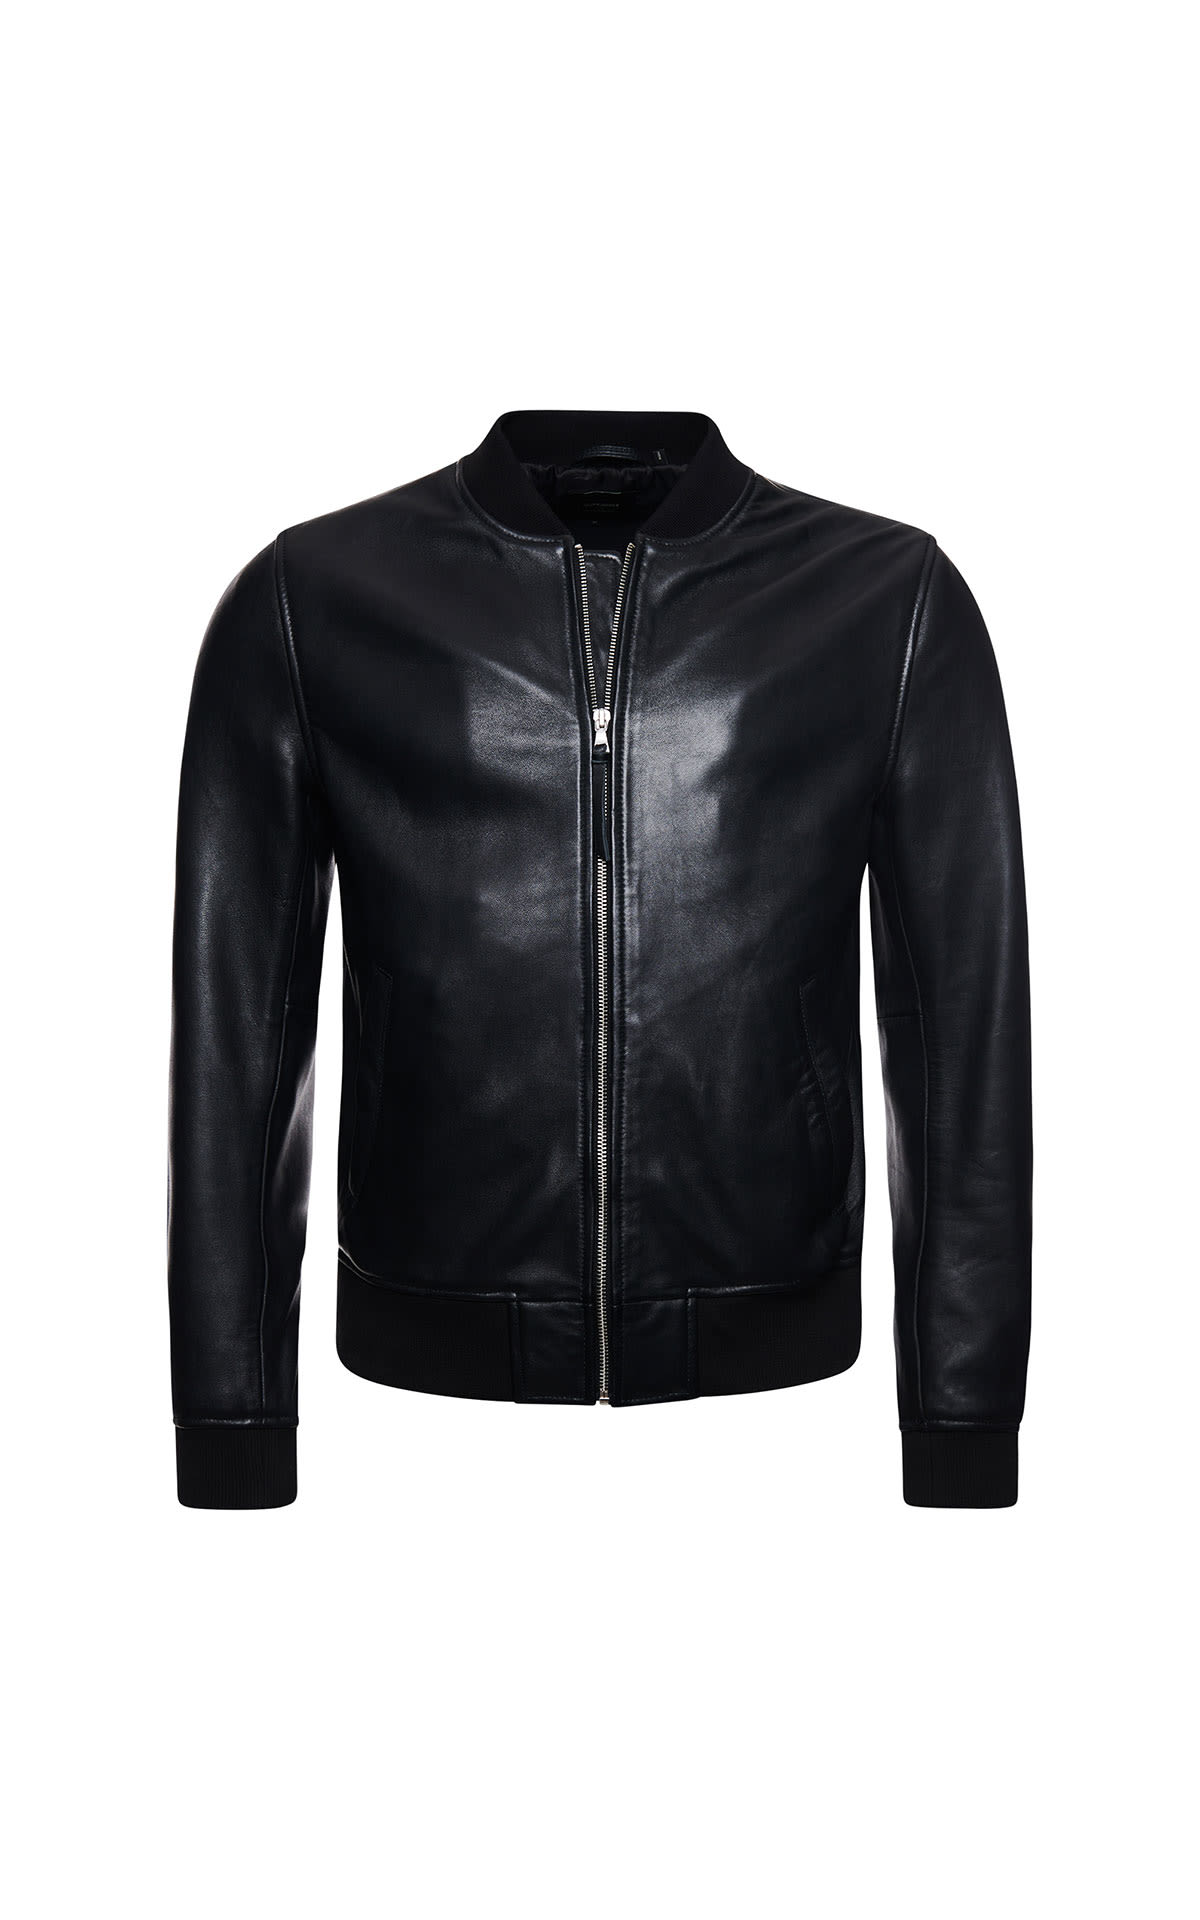 Superdry Studios leather fight bomber black from Bicester Village